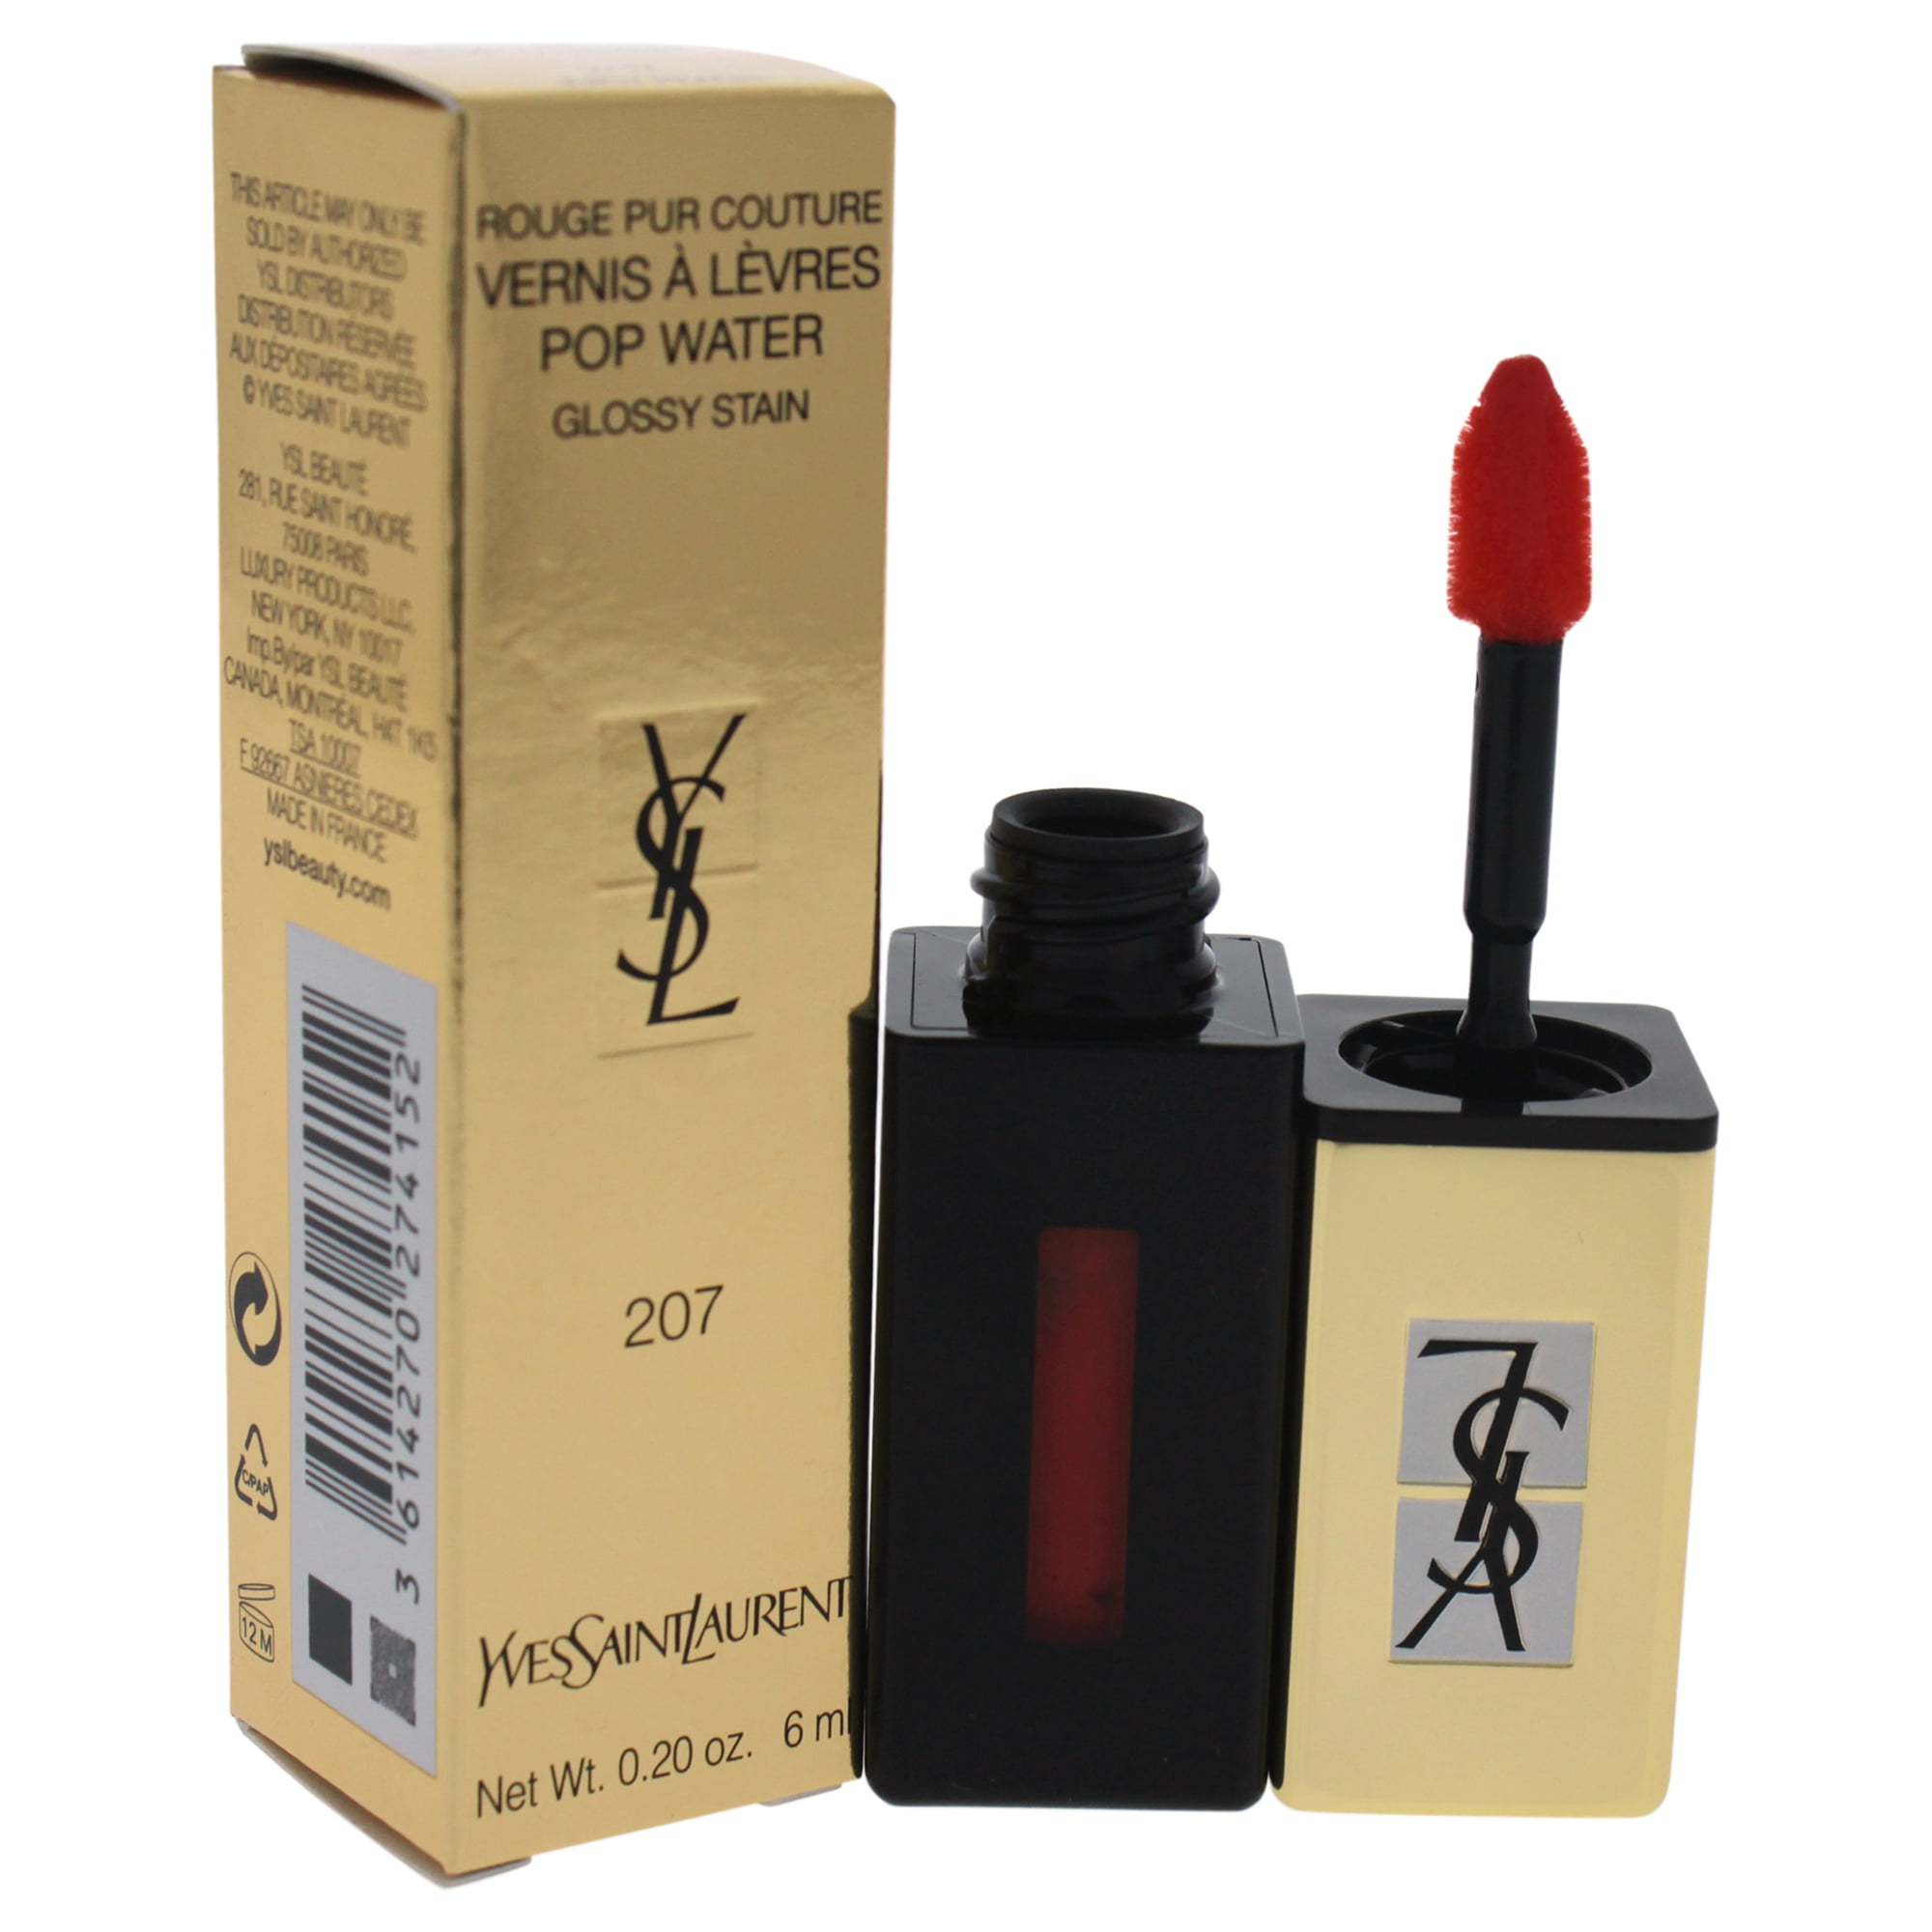 Vernis a Levres Pop Water Stain - # 207 Juicy Peach by Yves Saint Laurent for Women - 0.2 Lip Gloss | Walmart Canada